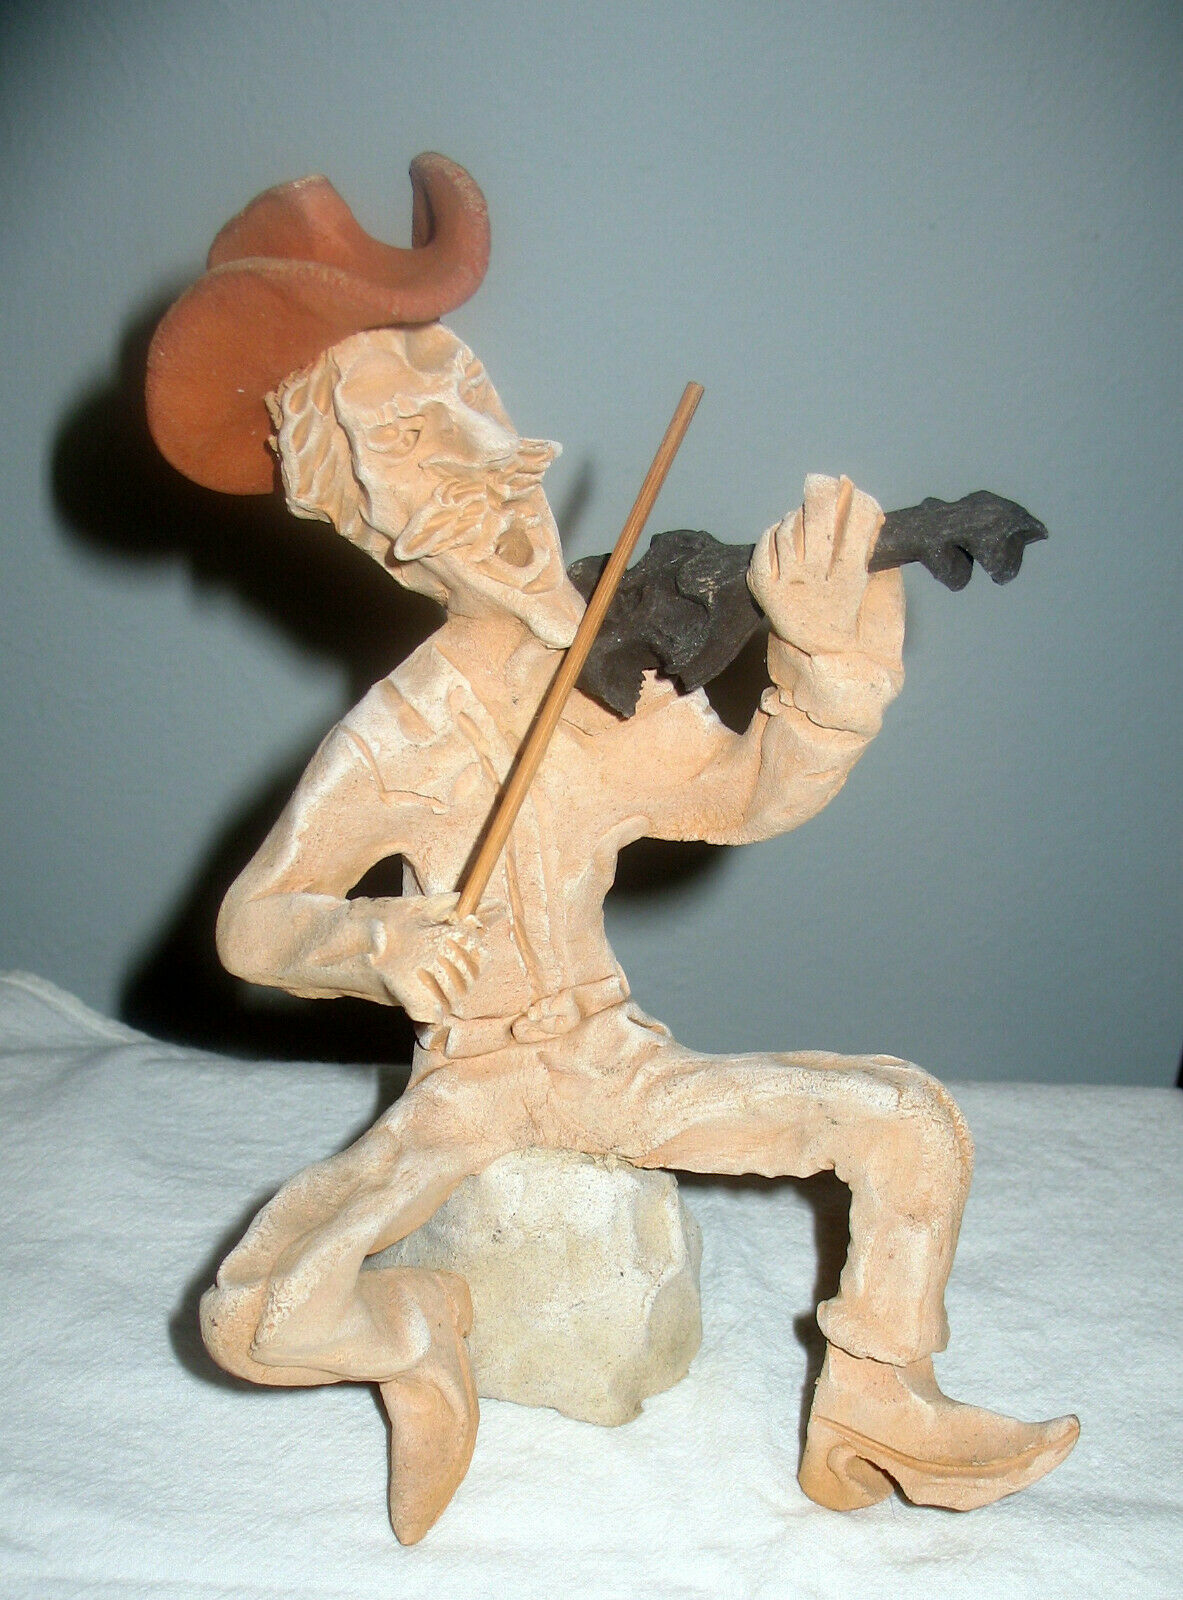 Tom Schoolcraft Clay Sculpture Figurine Cowboy Playing Fiddle, Signed